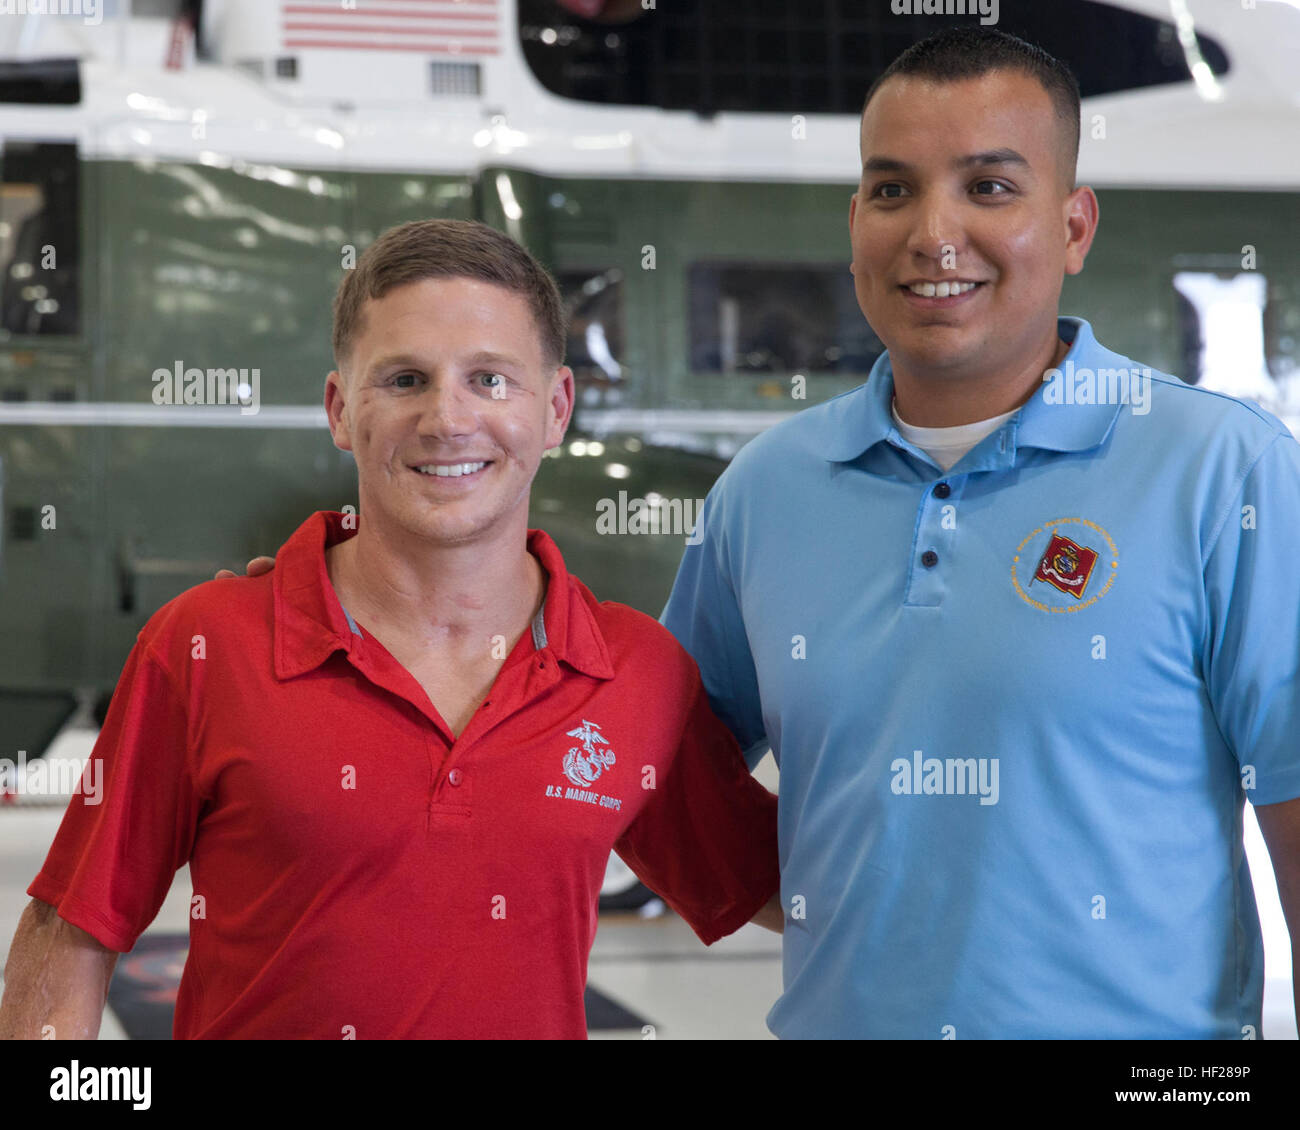 Retired U.S. Marine Corps Cpl. William Kyle Carpenter, left, poses for a photo during a visit to Marine Helicopter Squadron 1 aboard Marine Corps Base Quantico in Quantico, Va., June 17, 2014. Carpenter will receive the Medal of Honor from the President of the United States Barack Obama during a ceremony at the White House on Thursday, June 19, 2014. (U.S. Marine Corps photo by Cpl. Michael C. Guinto/Released) Medal of Honor Kyle Carpenter 140617-M-LI307-120 Stock Photo